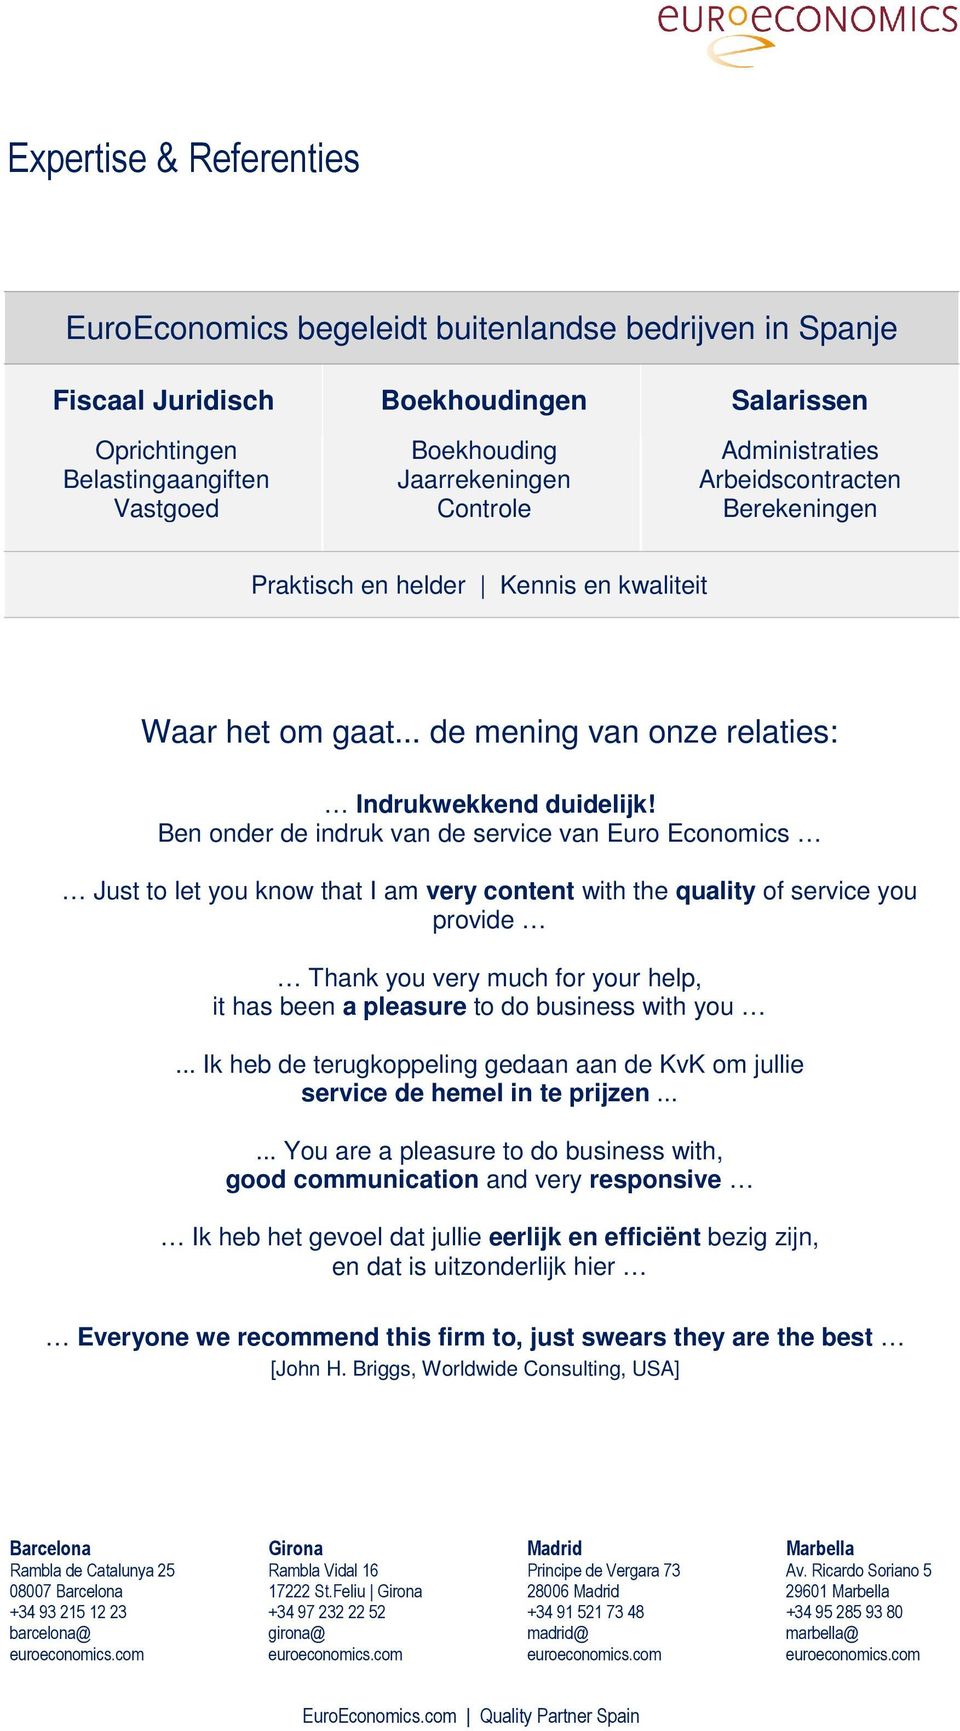 Ben onder de indruk van de service van Euro Economics Just to let you know that I am very content with the quality of service you provide Thank you very much for your help, it has been a pleasure to